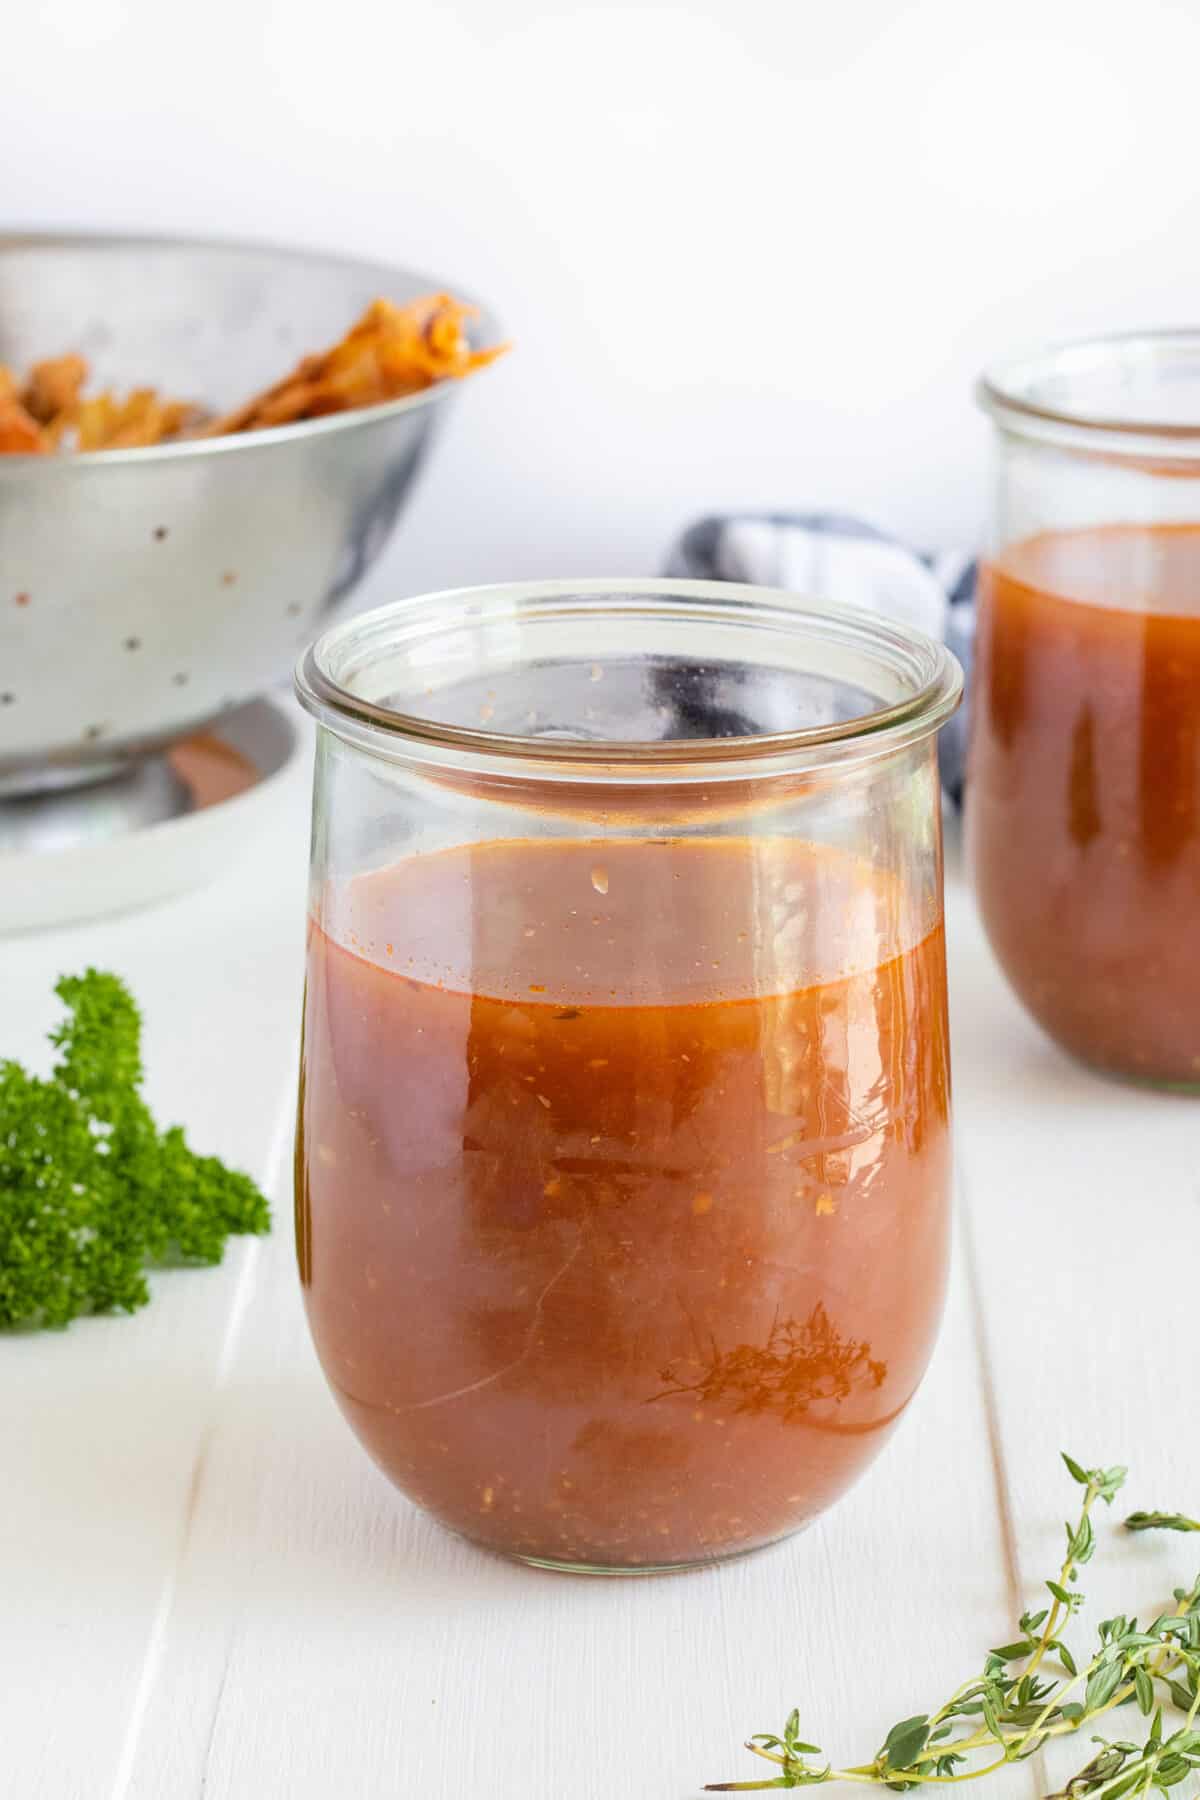 seafood stock in a glass jar